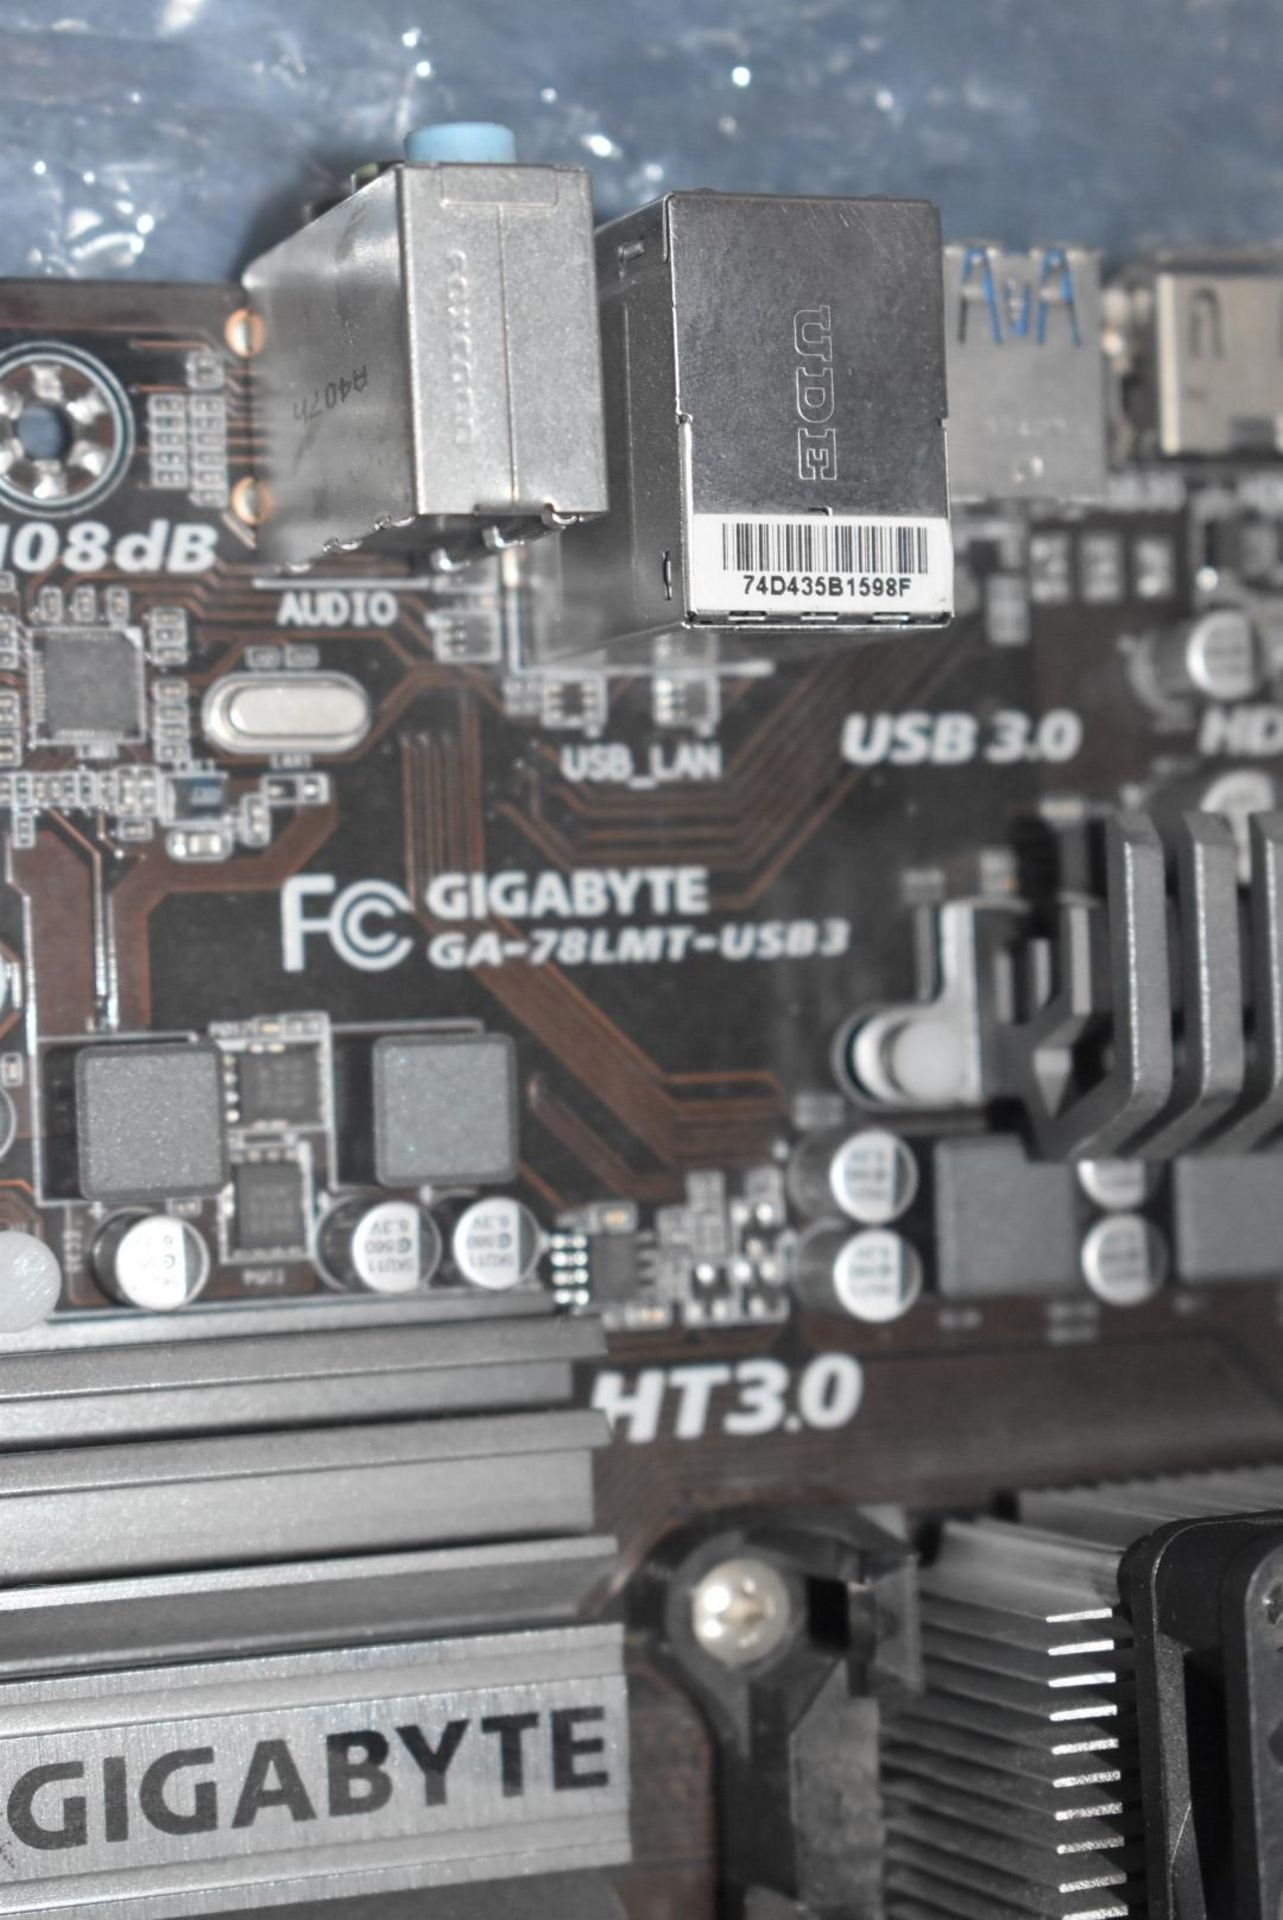 1 x Gigabyte GA-78LMT-USB3 Motherboard With an AMD FX-8370 8 Core Processor and 4gb Ram - Image 3 of 7